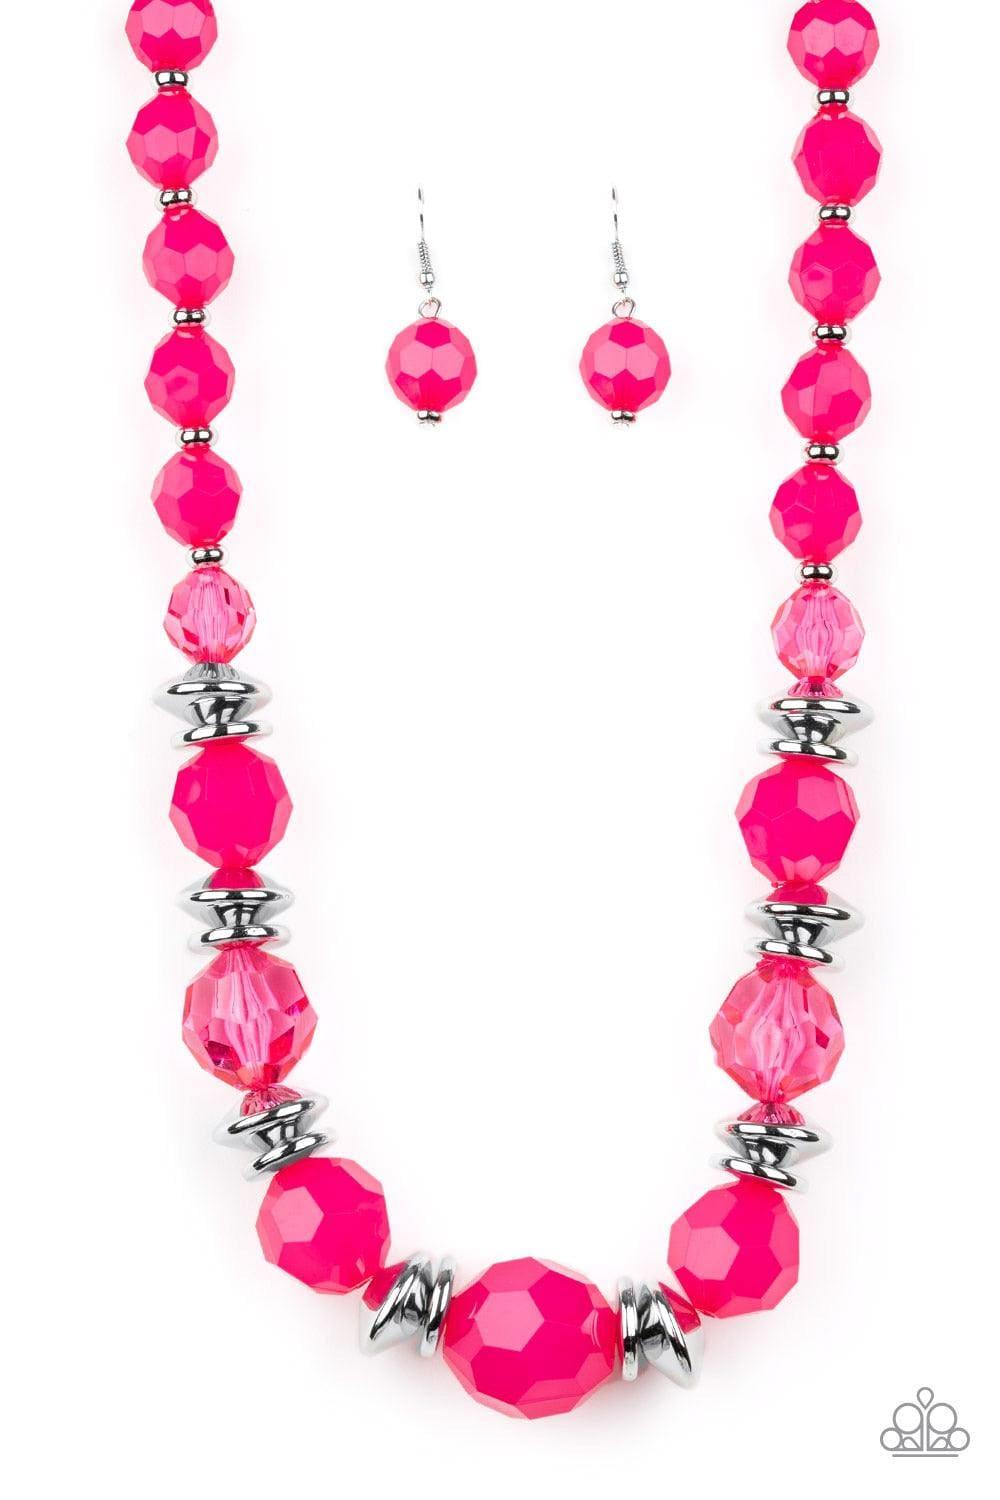 Paparazzi Accessories - Dine And Dash - Pink Necklace - Bling by JessieK